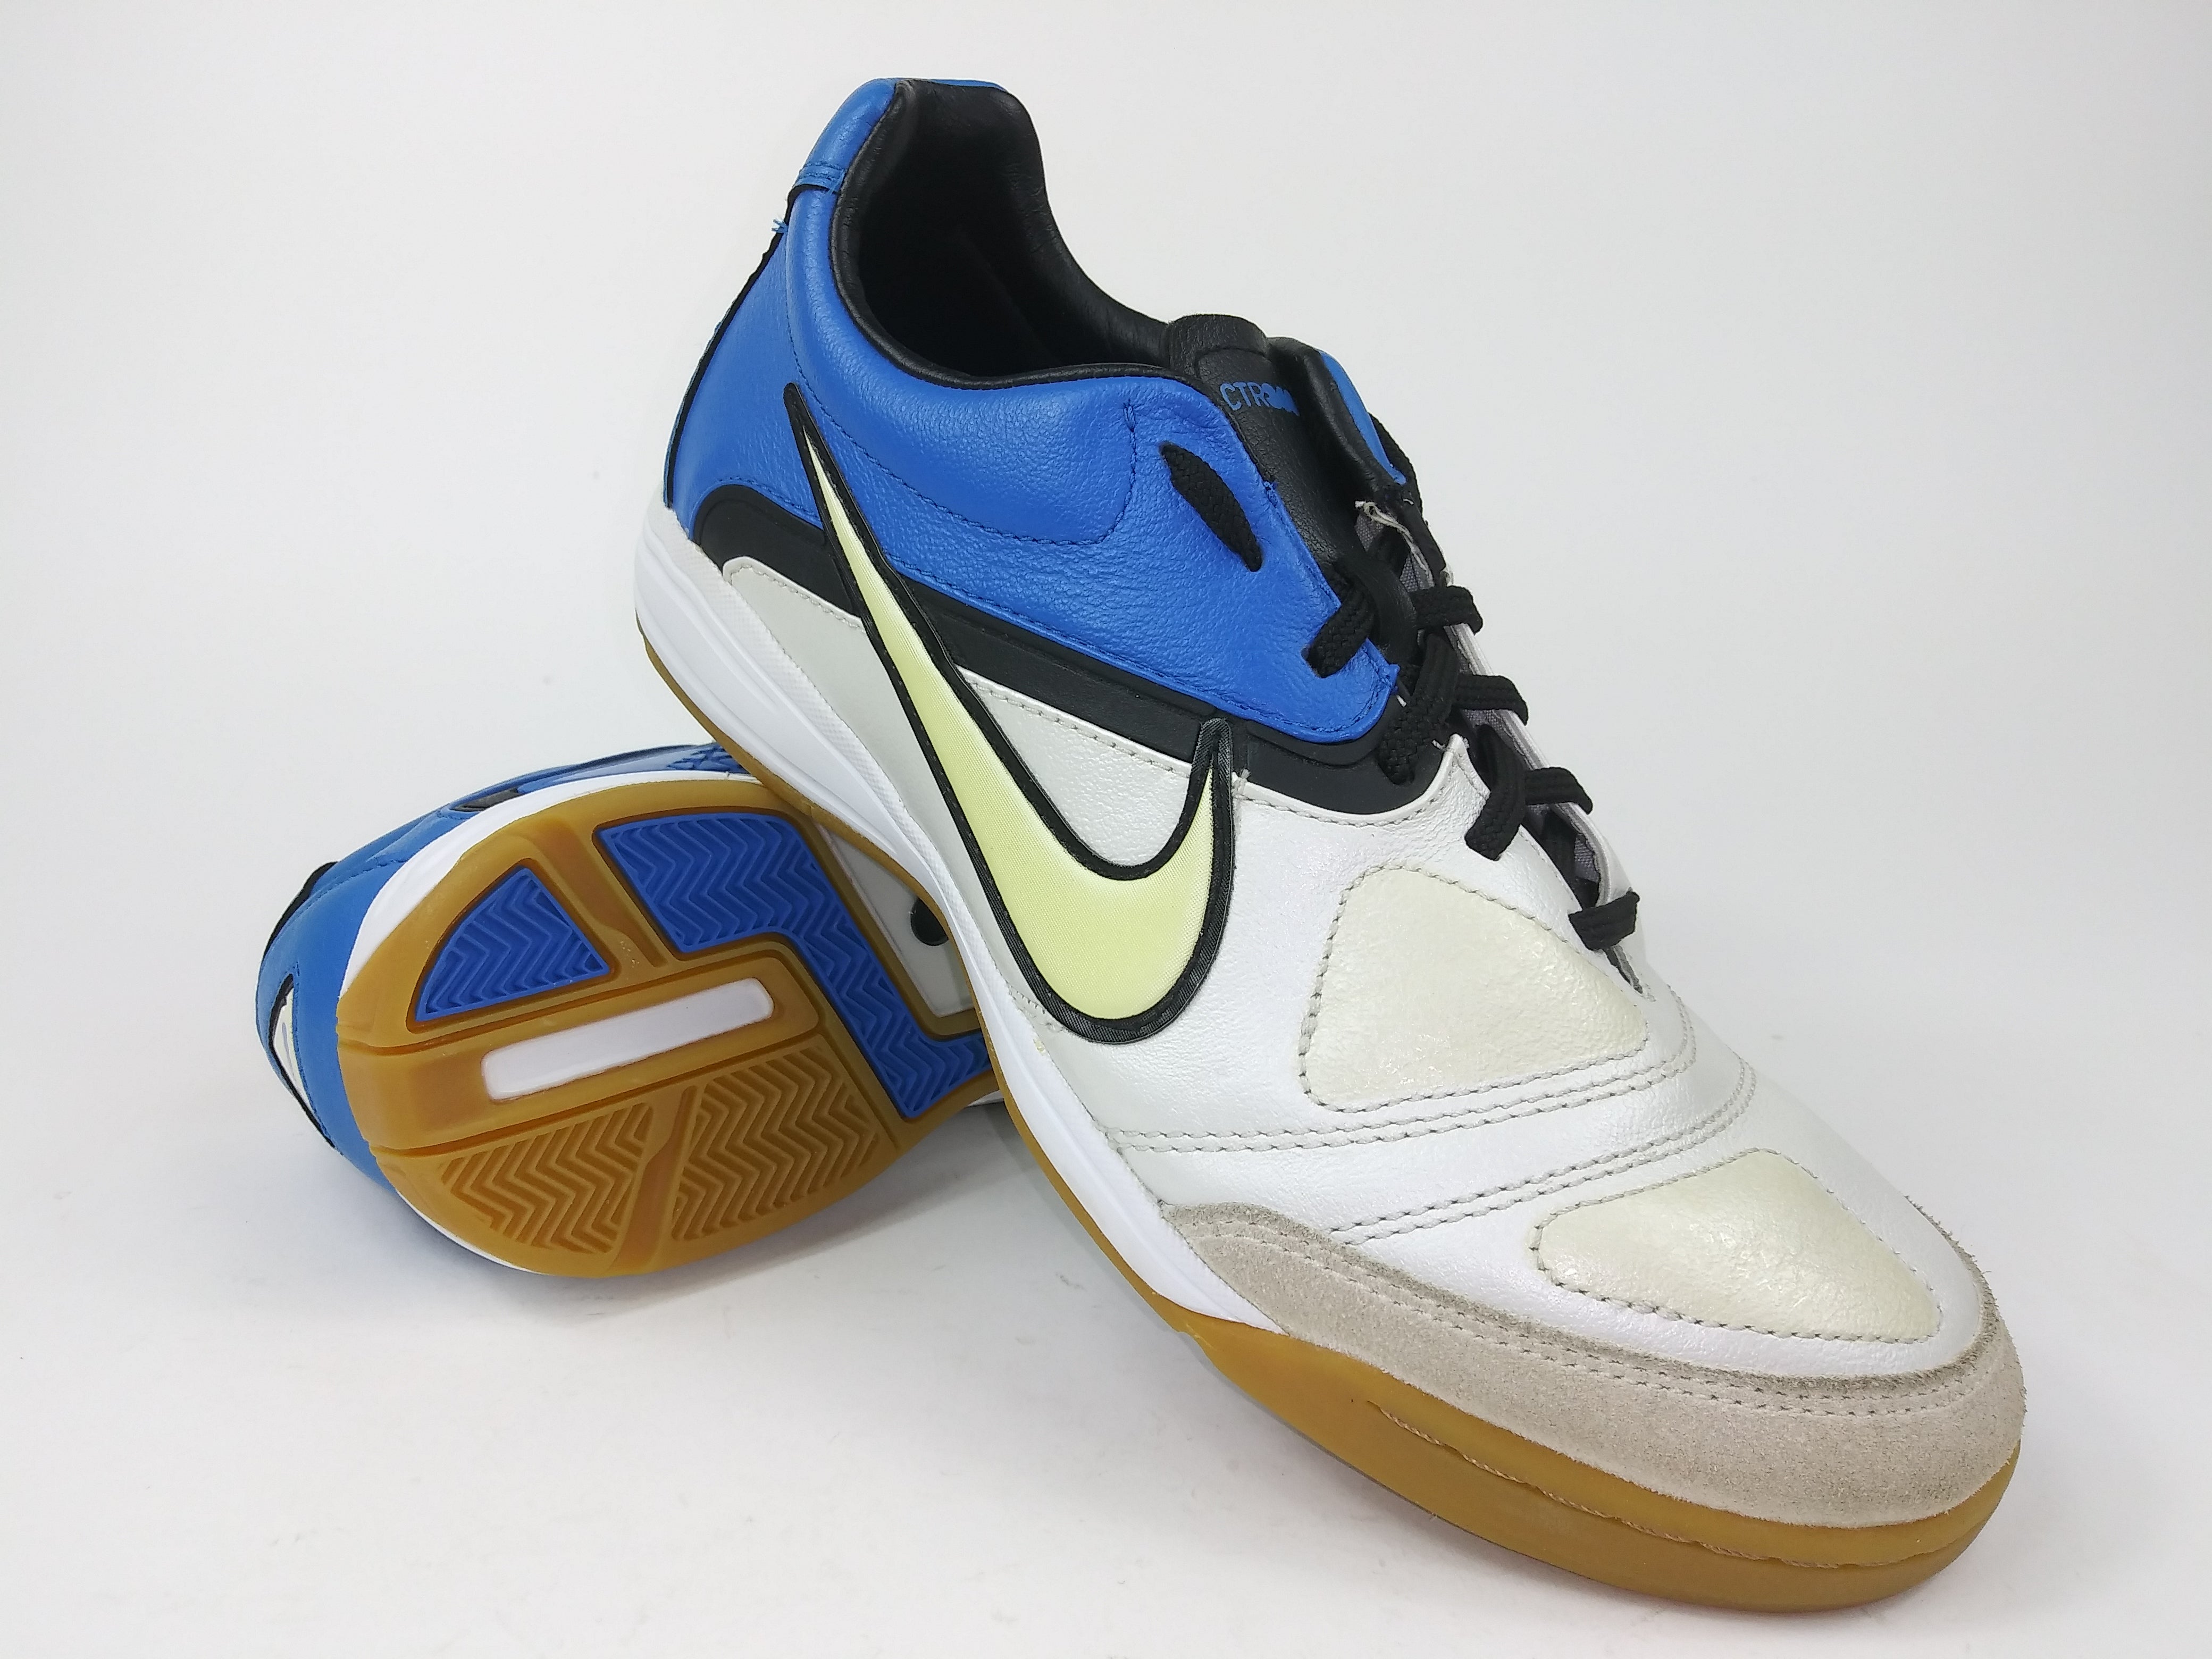 omhyggeligt Kammer Metropolitan Nike CTR 360 Libretto ll IC Indoor Shoes White Blue – Villegas Footwear